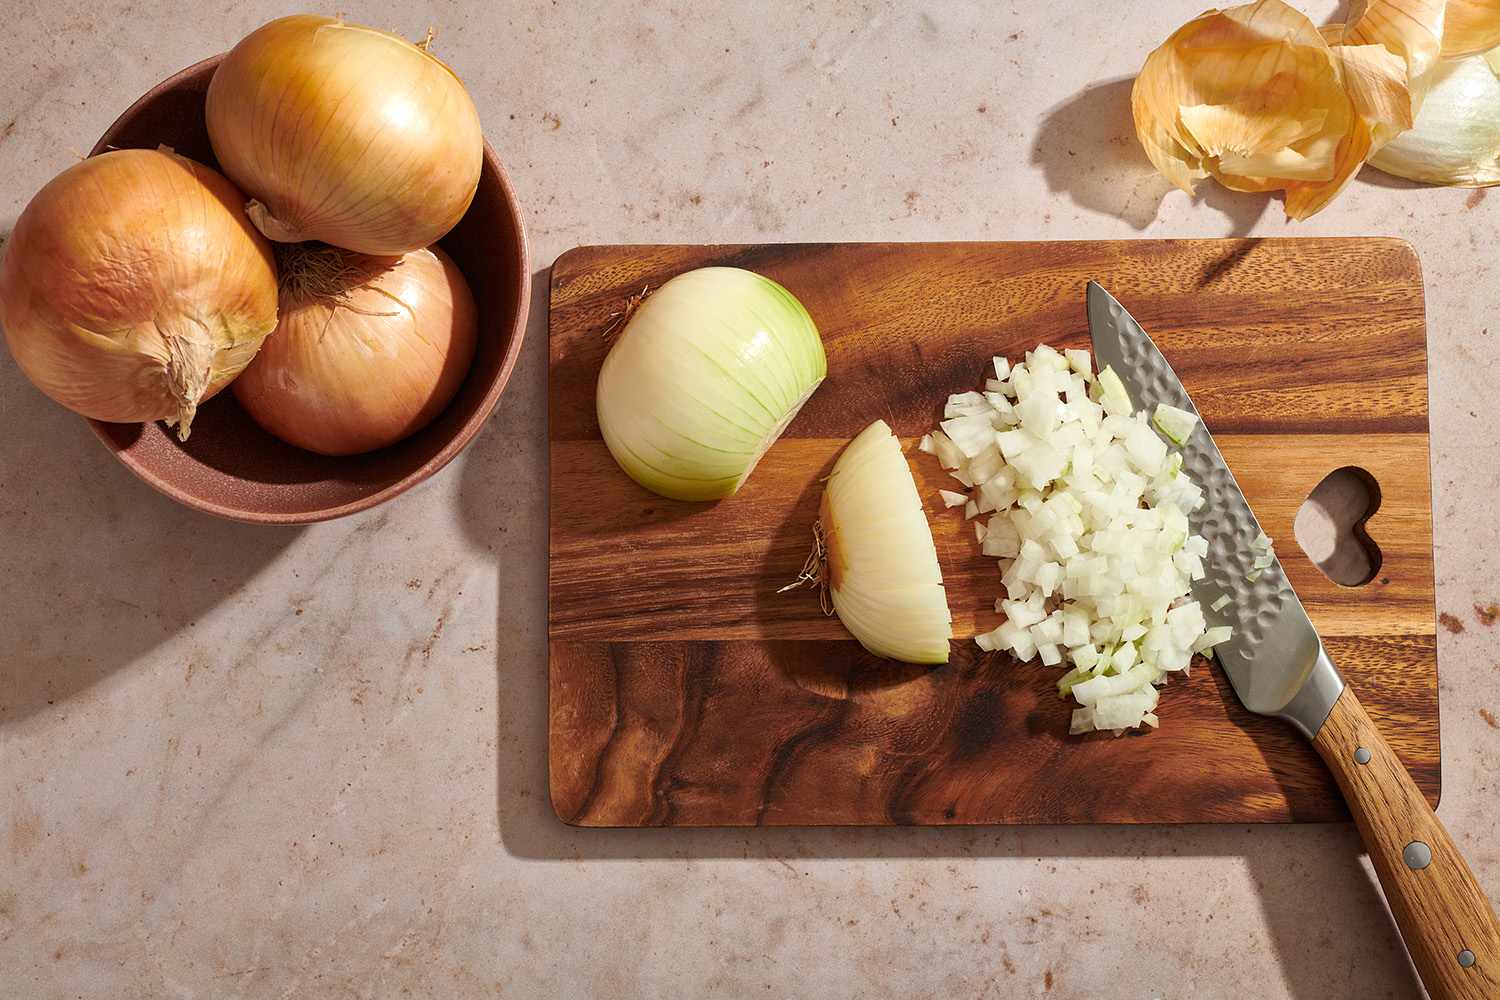 peeled onion on a cutting board partly diced, with chef's knife